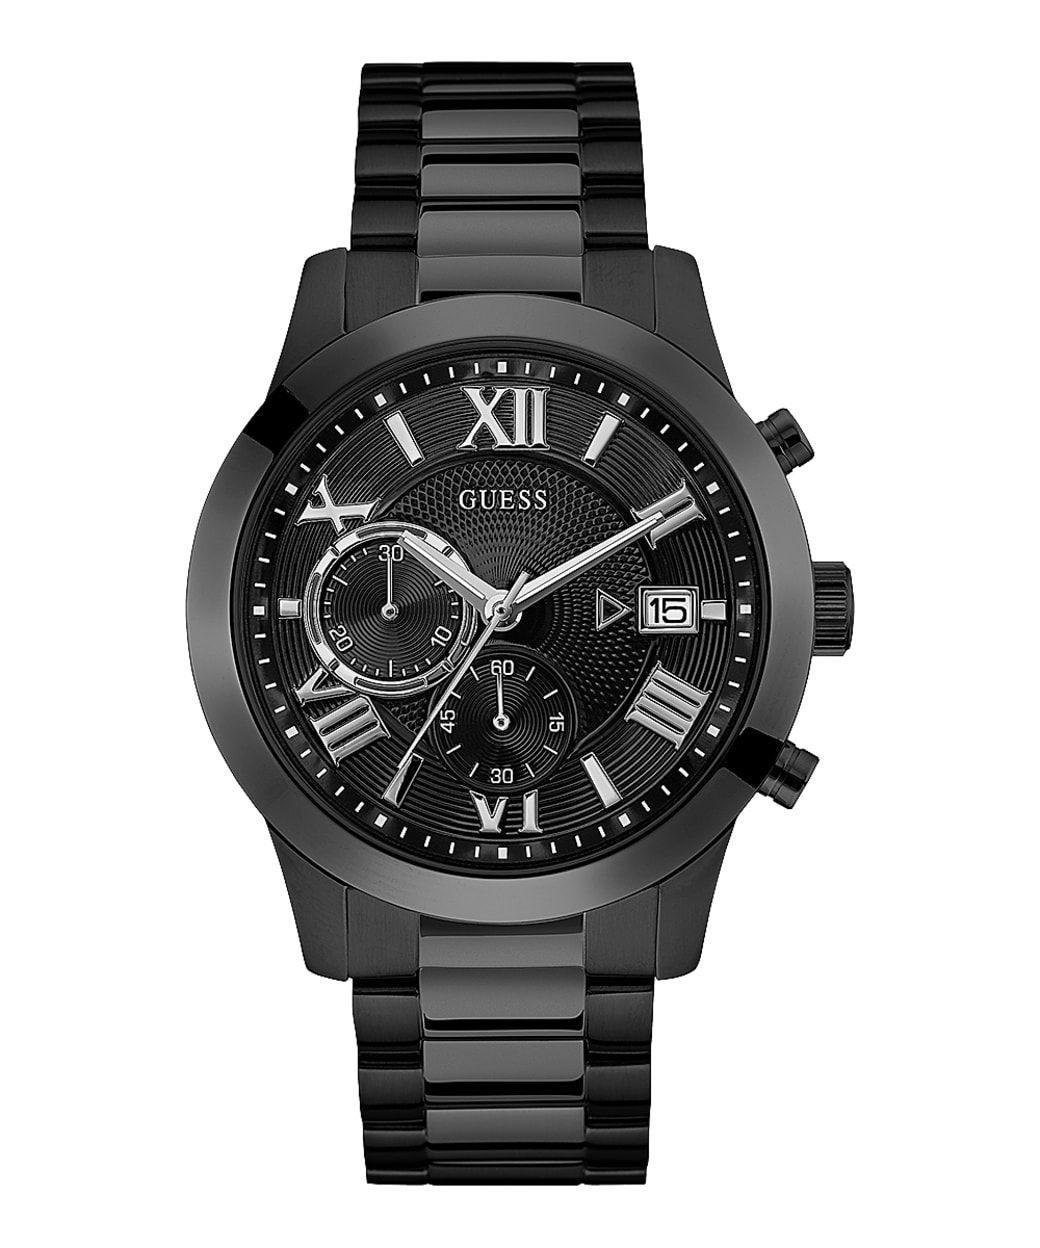 Mens 45mm Black Stainless Steel Watch - GUESS Watches